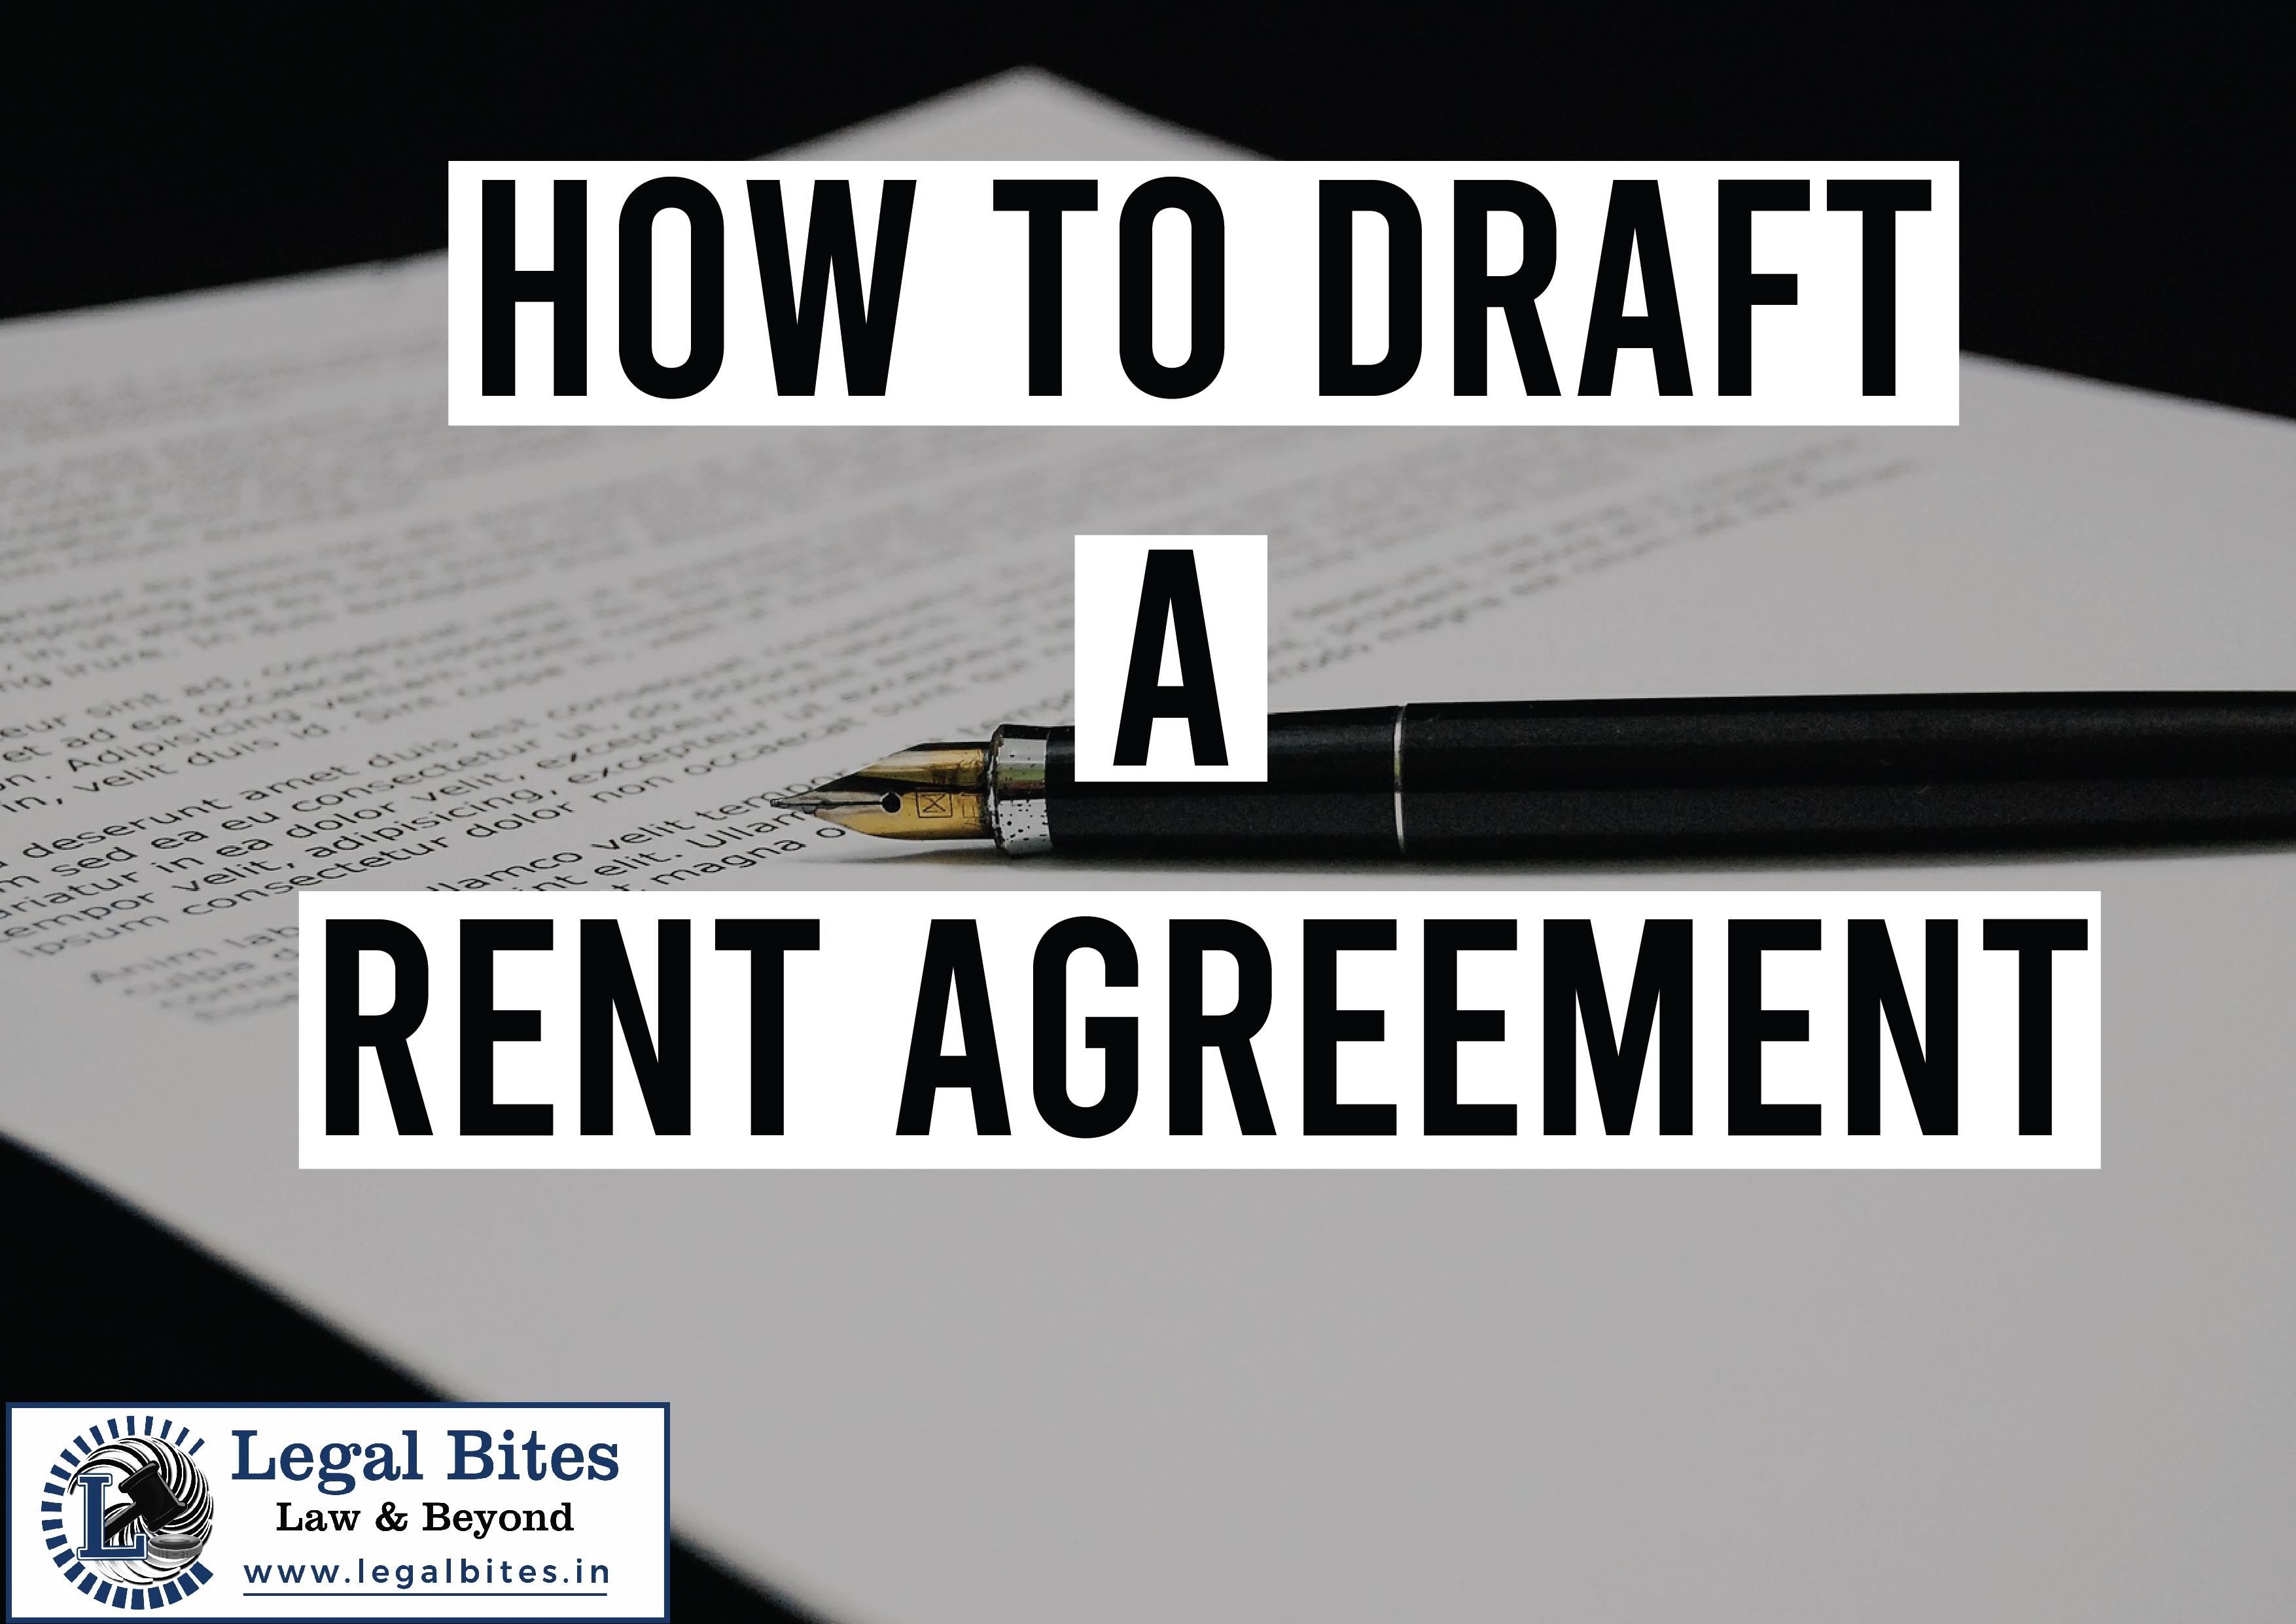 How to draft a Rent Agreement